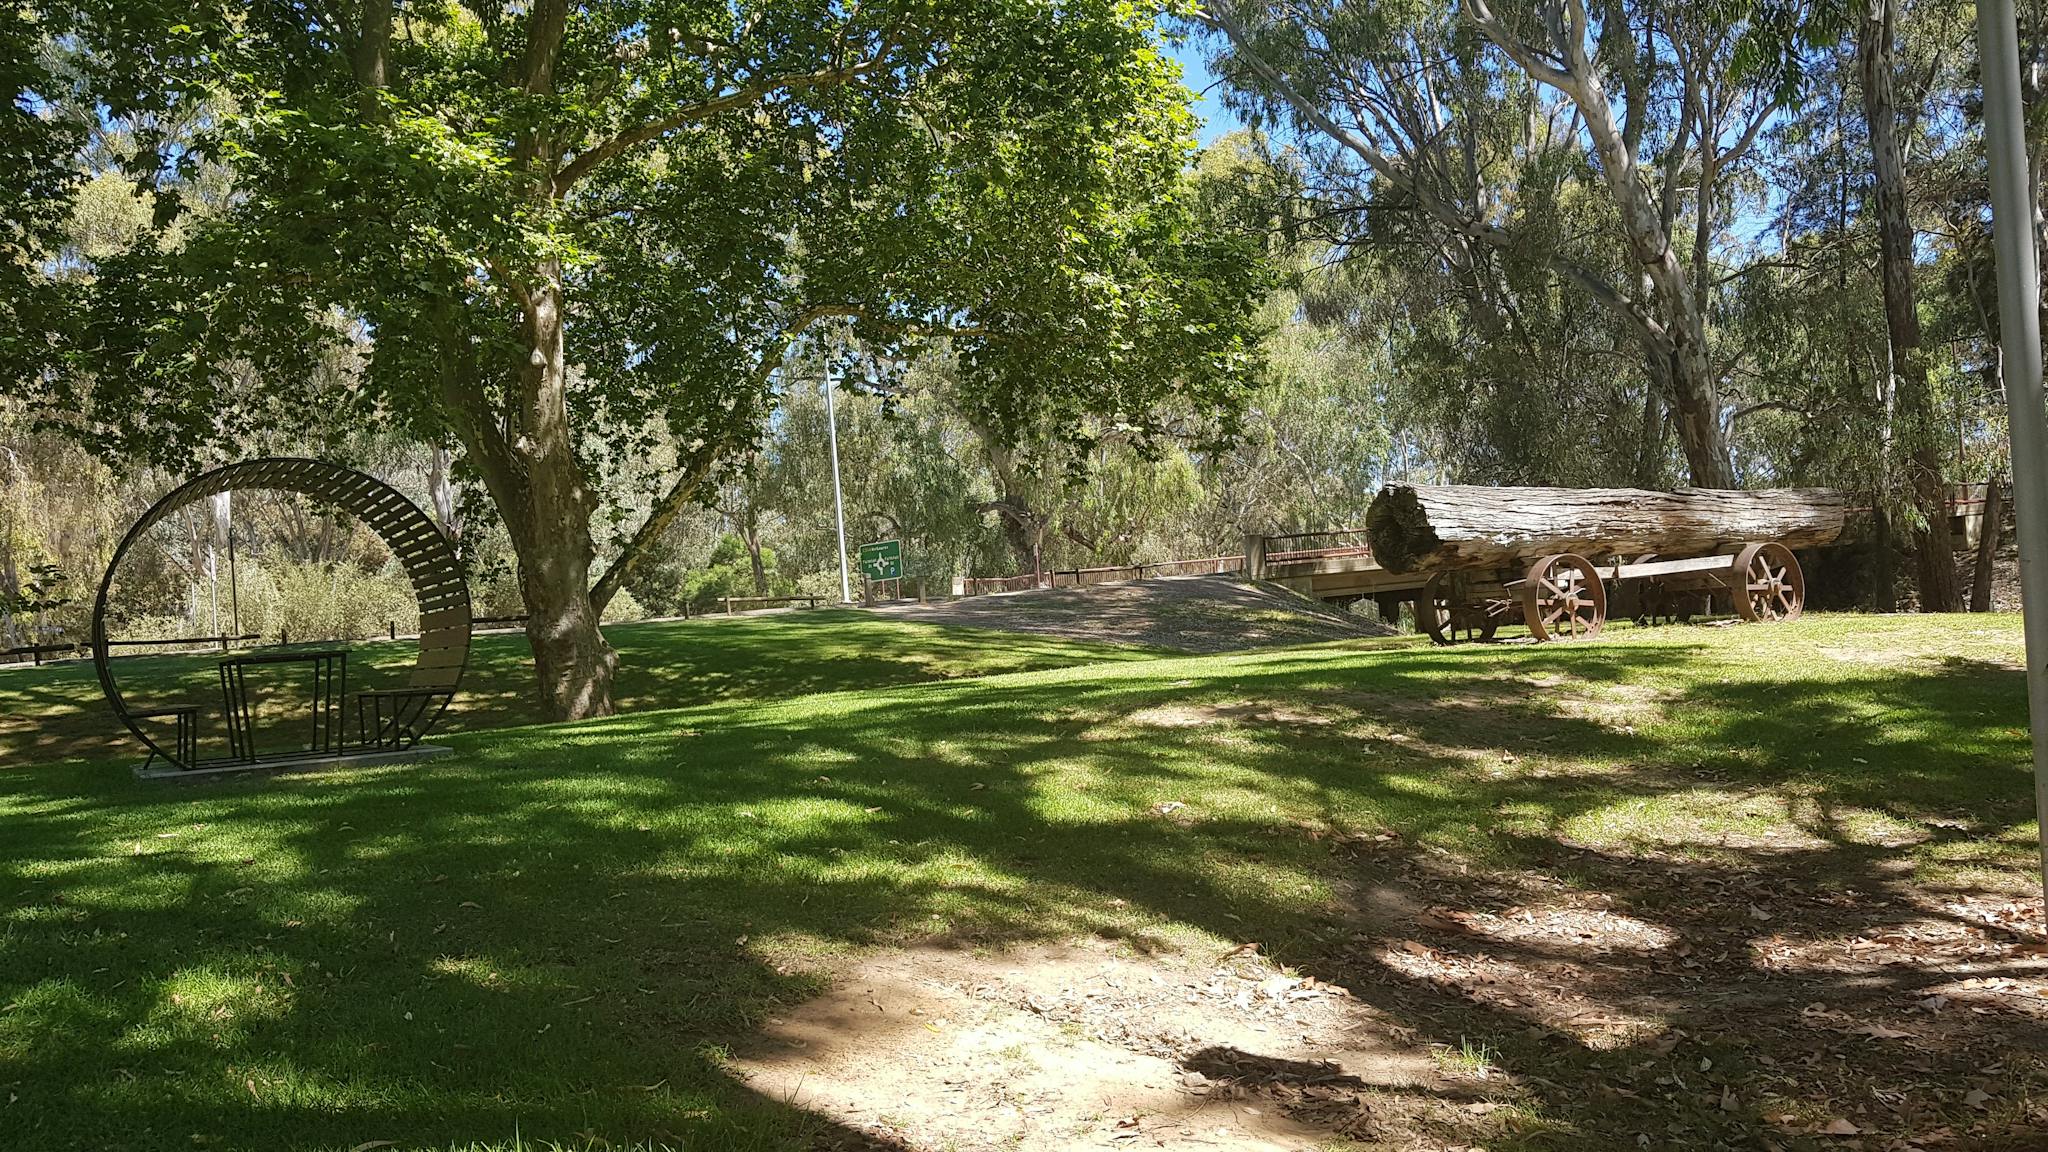 green grass, leafy tree, seating post, large tree trunk on vintage cart, gum trees